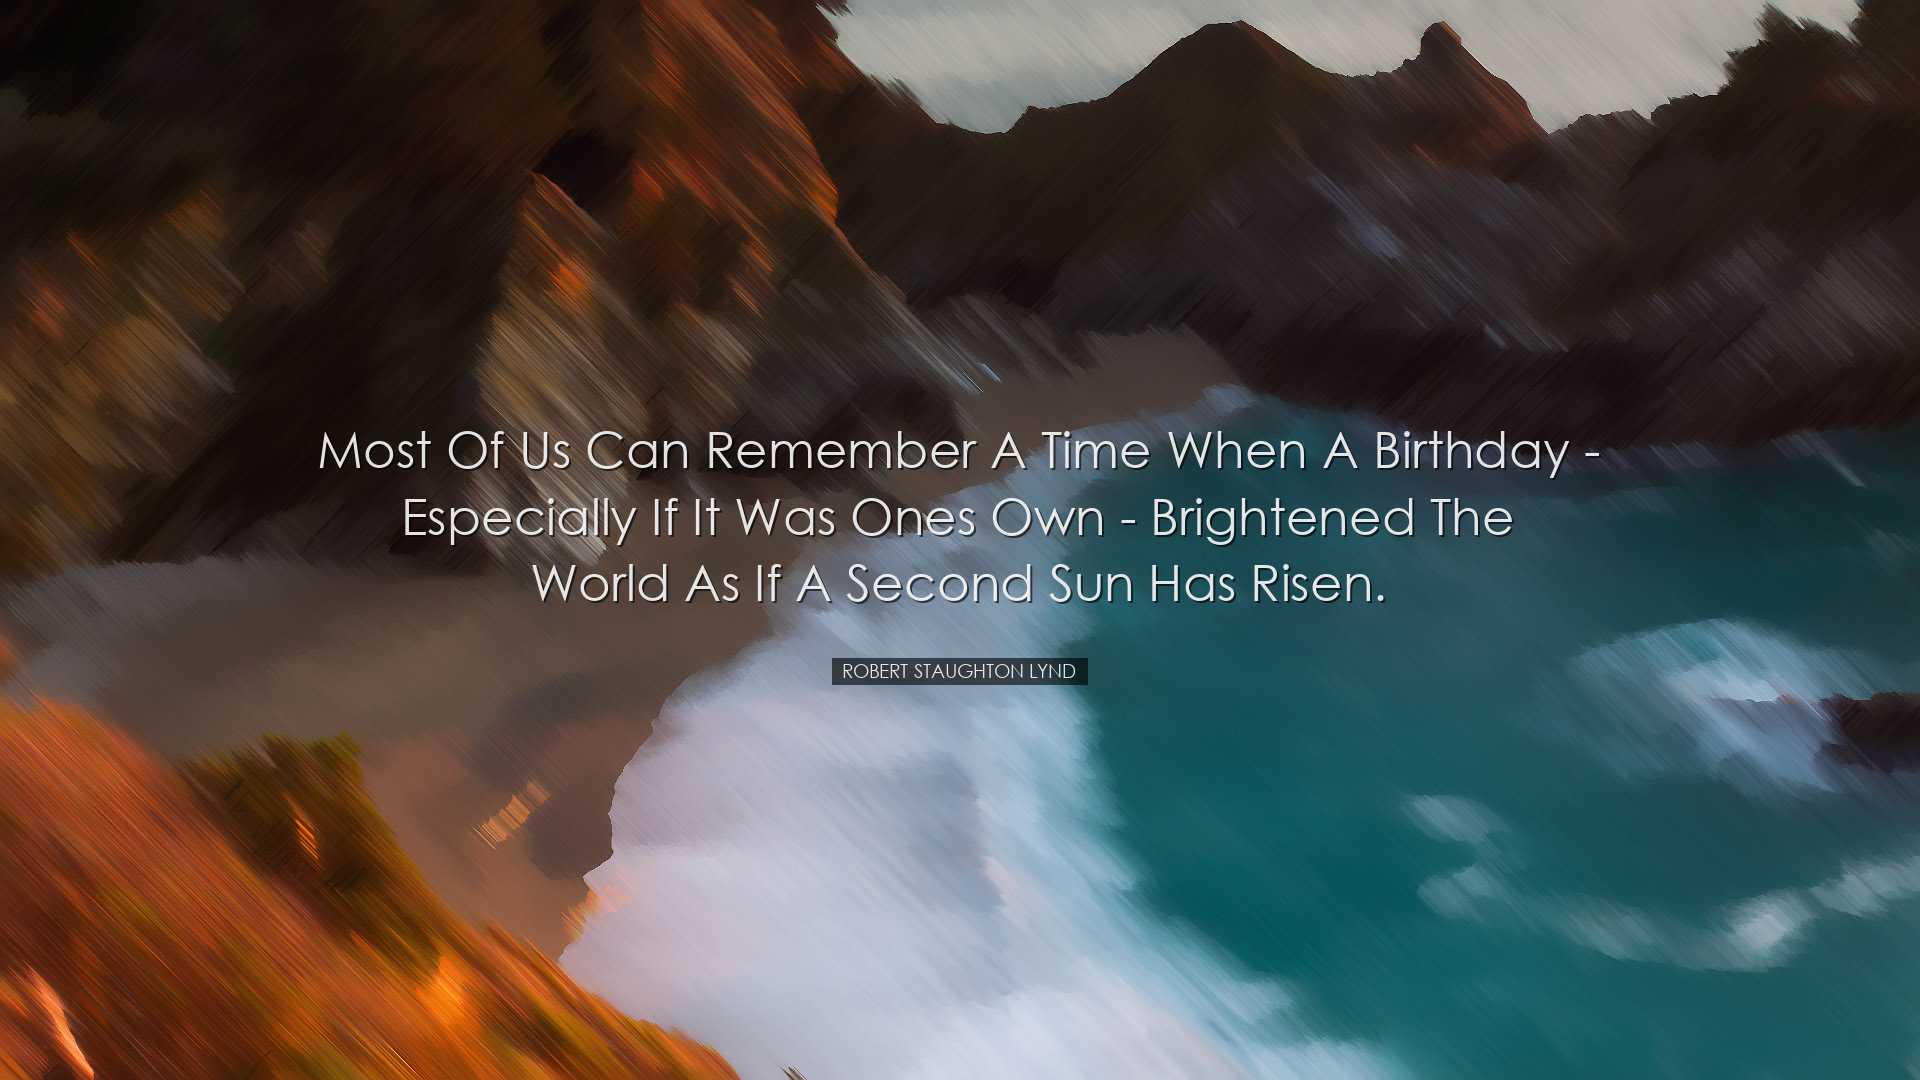 Most of us can remember a time when a birthday - especially if it